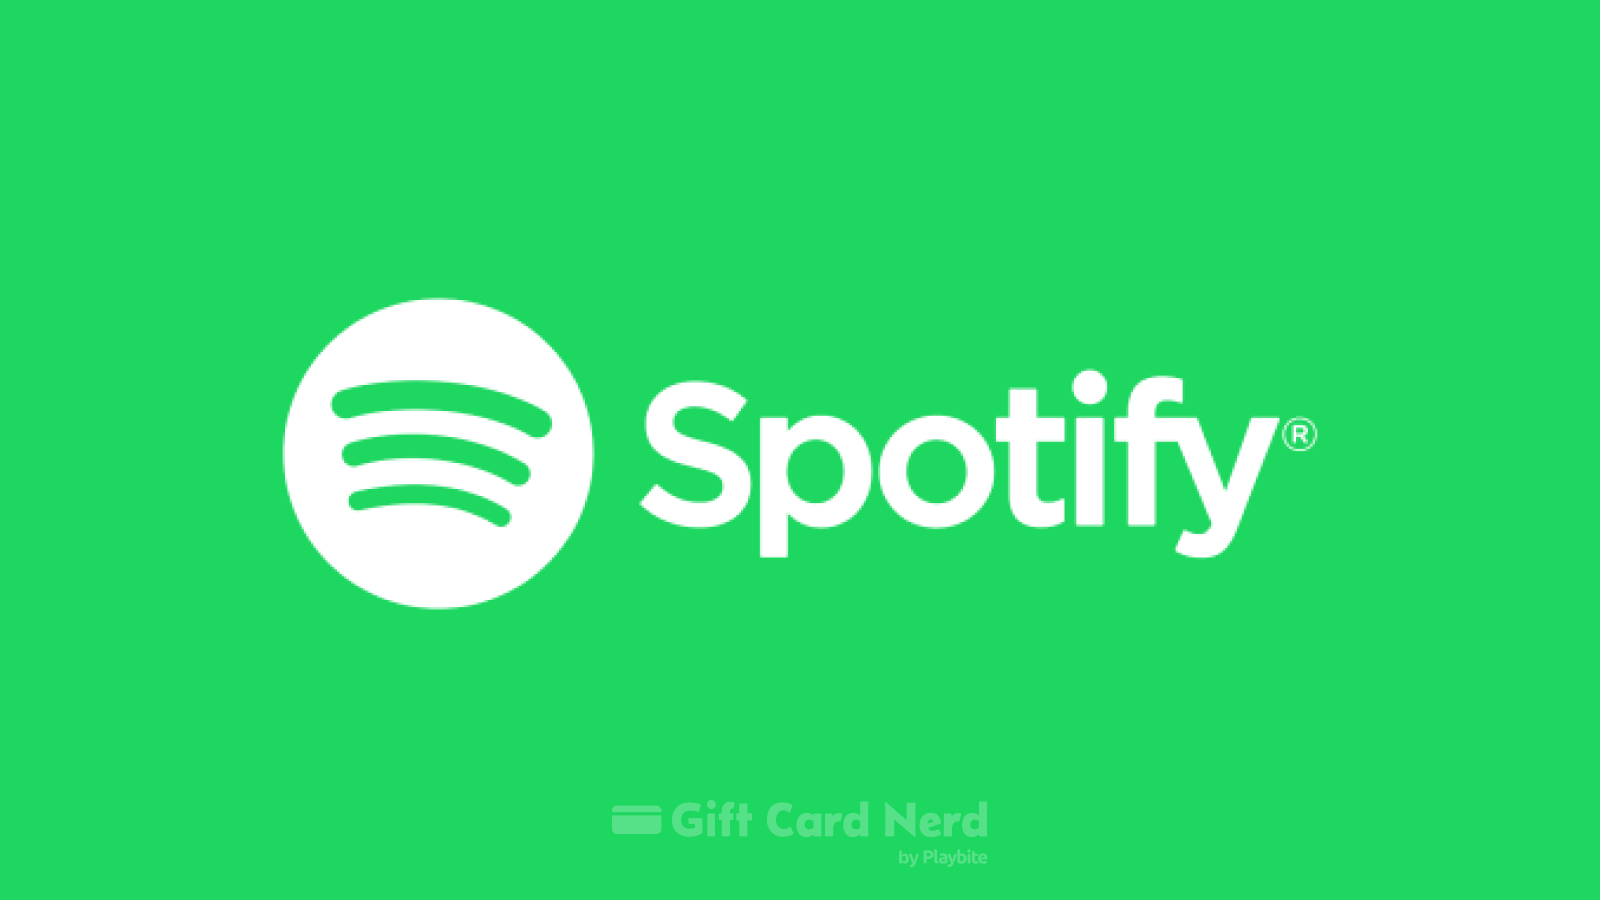 How to Check Your Spotify Gift Card Balance